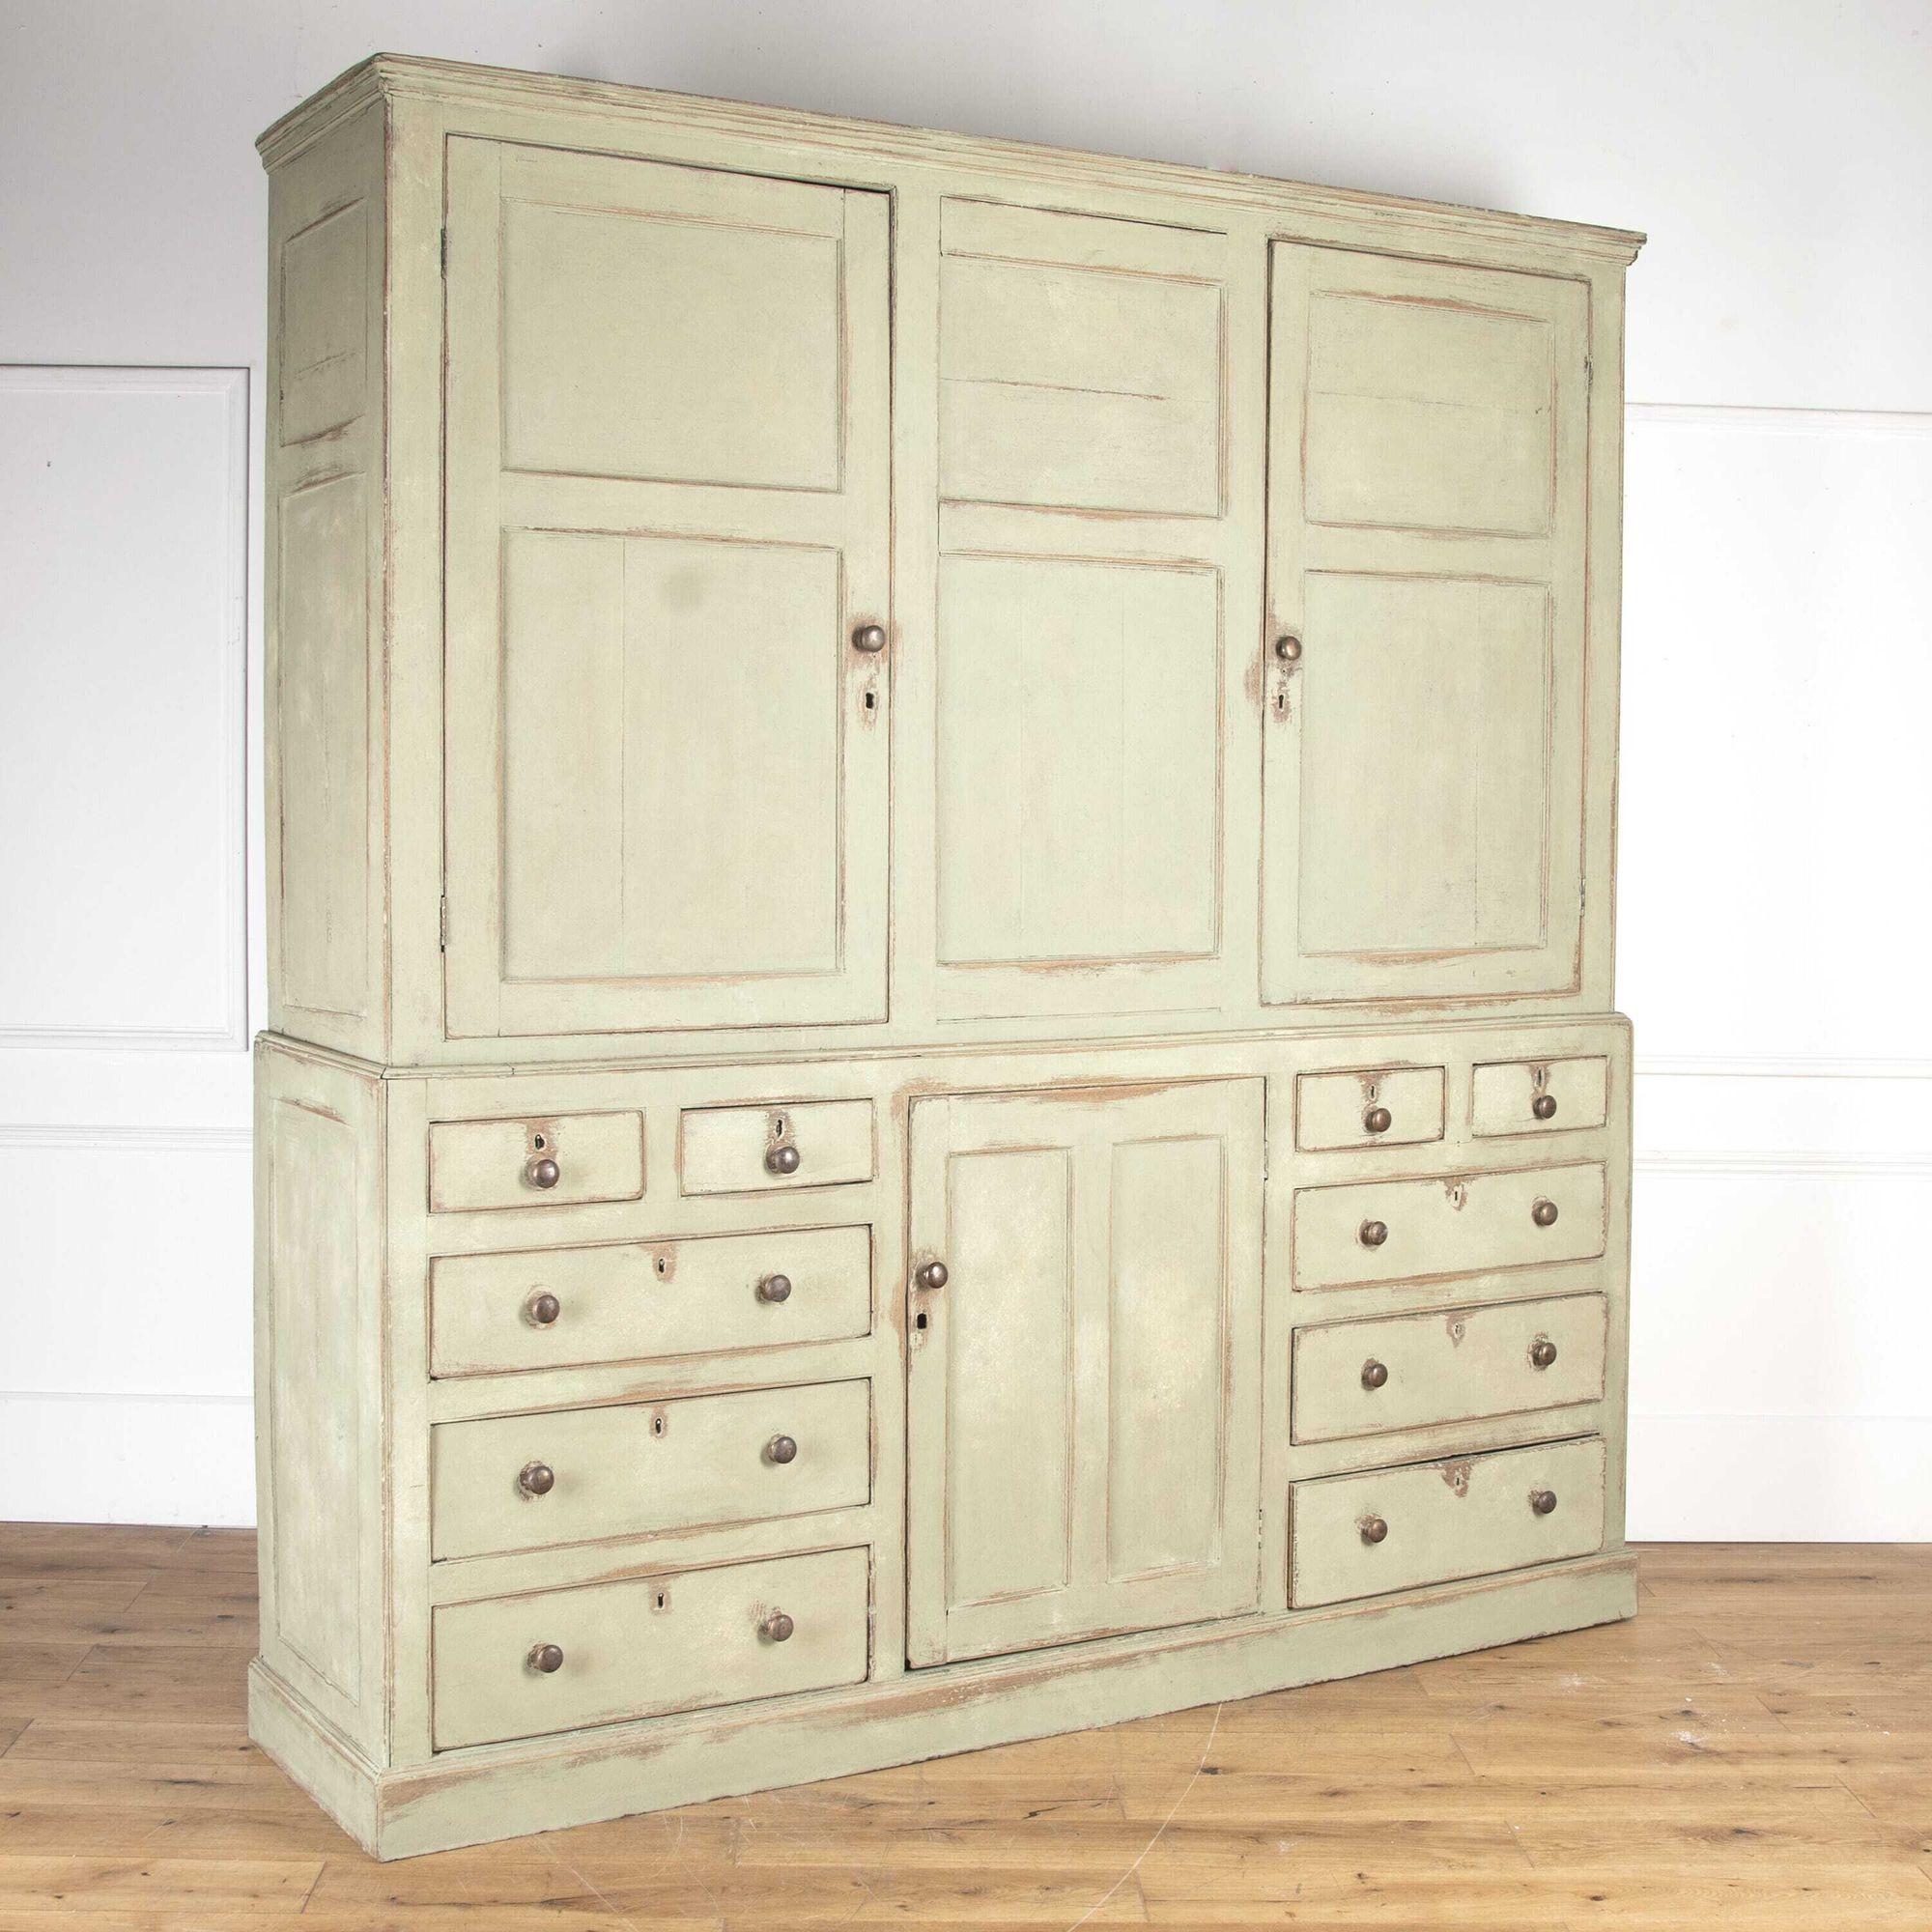 Fabulous 18th Century painted oak housekeepers cupboard.
This cupboard provides excellent storage because of how it splits into two halves. It is also a well-proportioned cupboard, it features three cupboard doors to the top which open to reveal